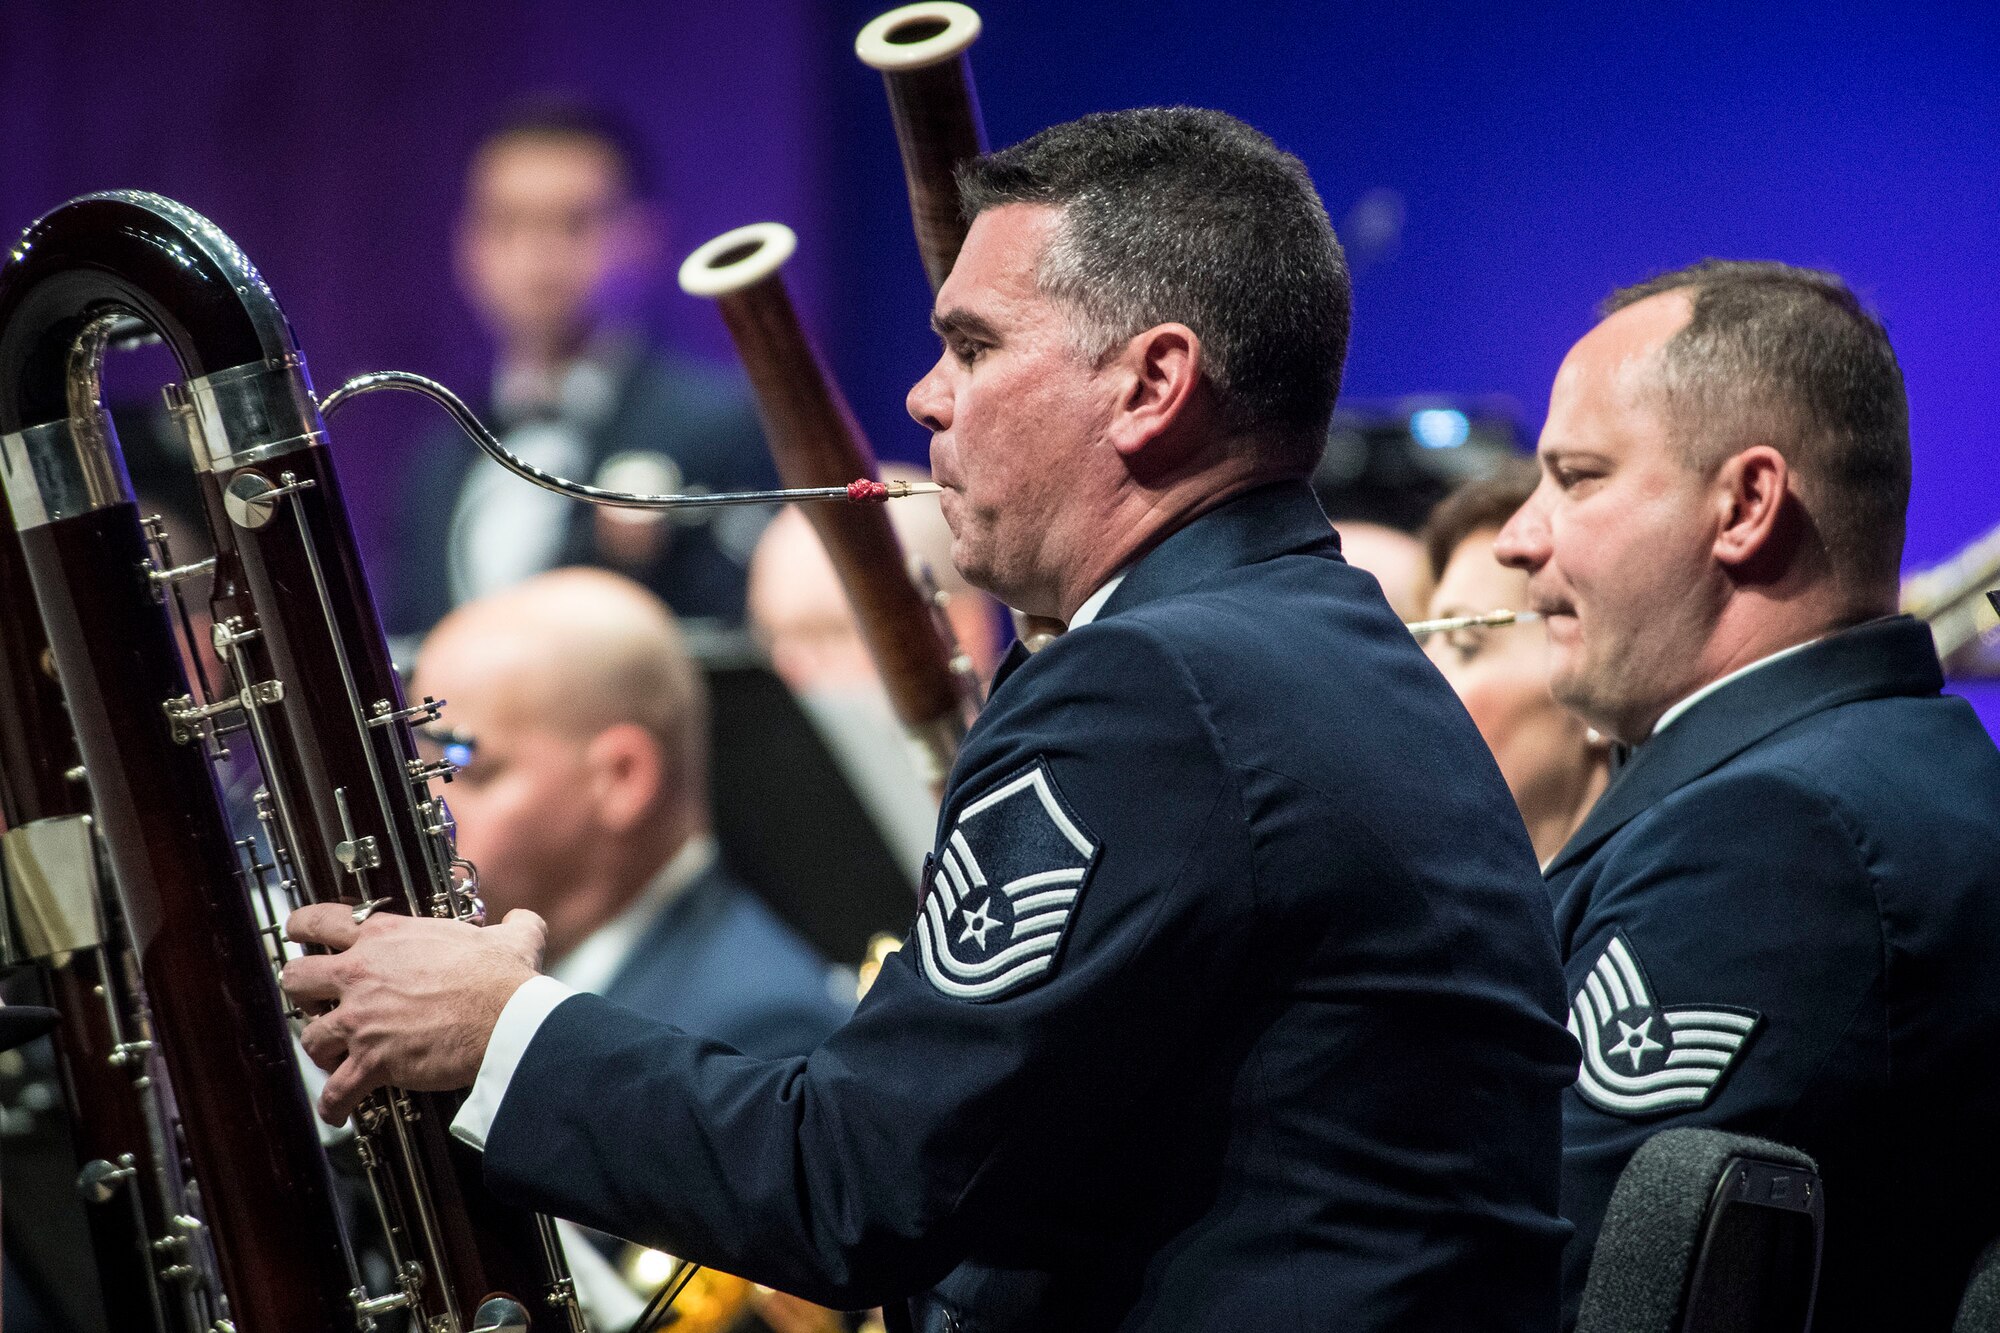 Master Sgt. Alejandro Vieira plays a contrabassoon during a U.S Air Force Academy Band performance Feb. 13 at Weber State University’s Austad Auditorium, Ogden, Utah.  (U.S. Air Force photo)